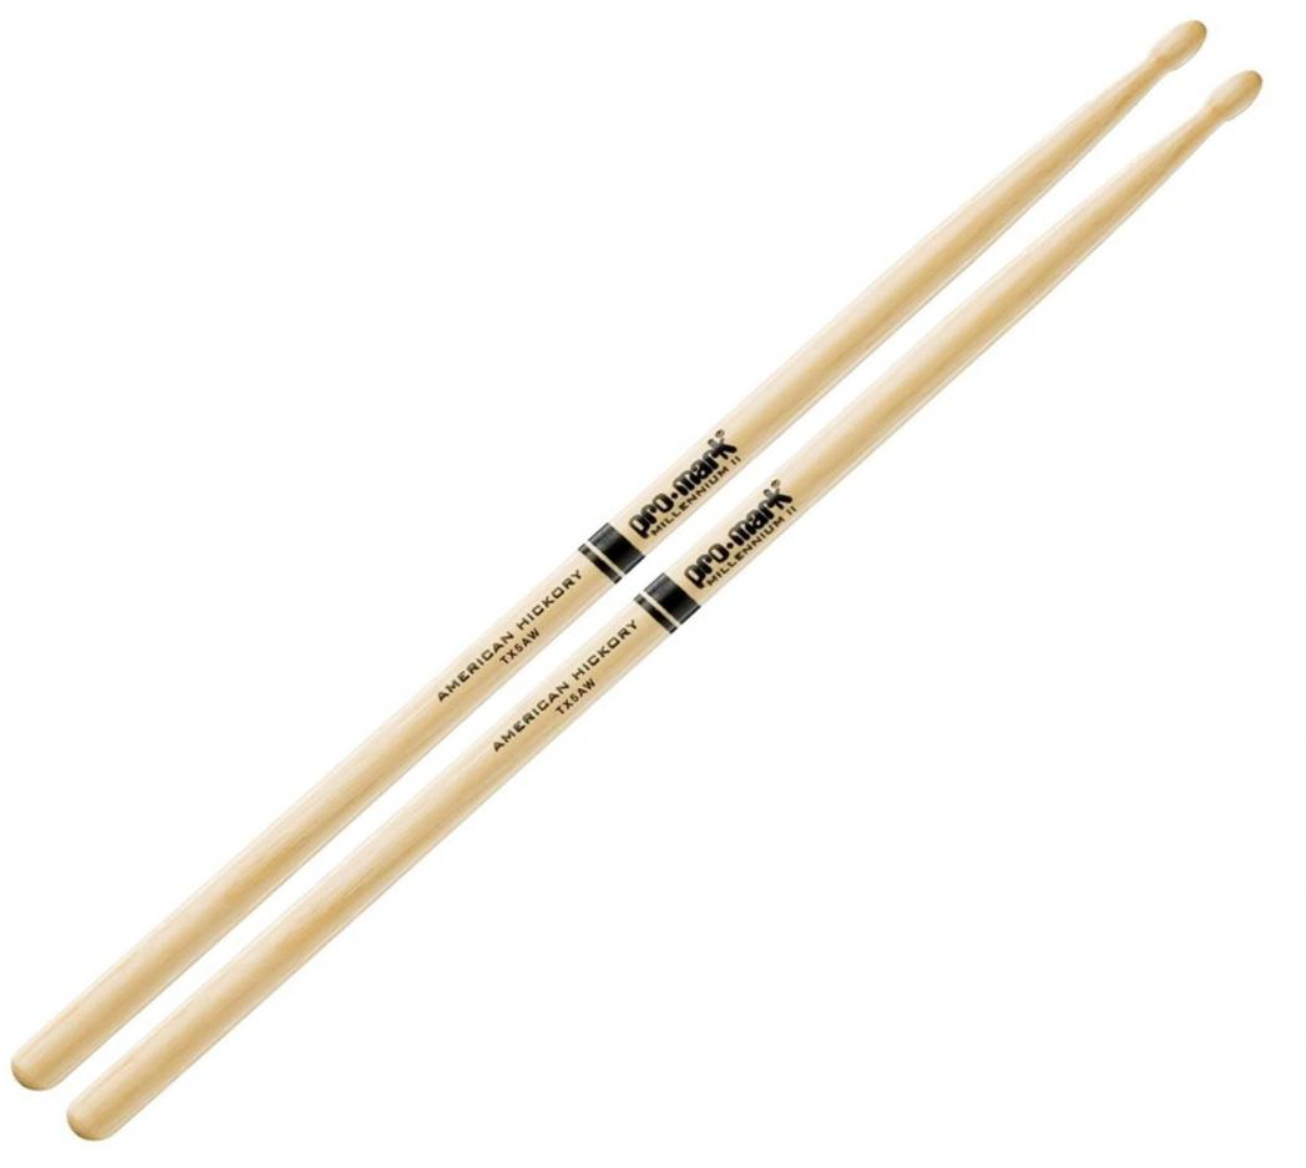  Promark TX5AW Hickory 5A Drumsticks, Wood Tip 